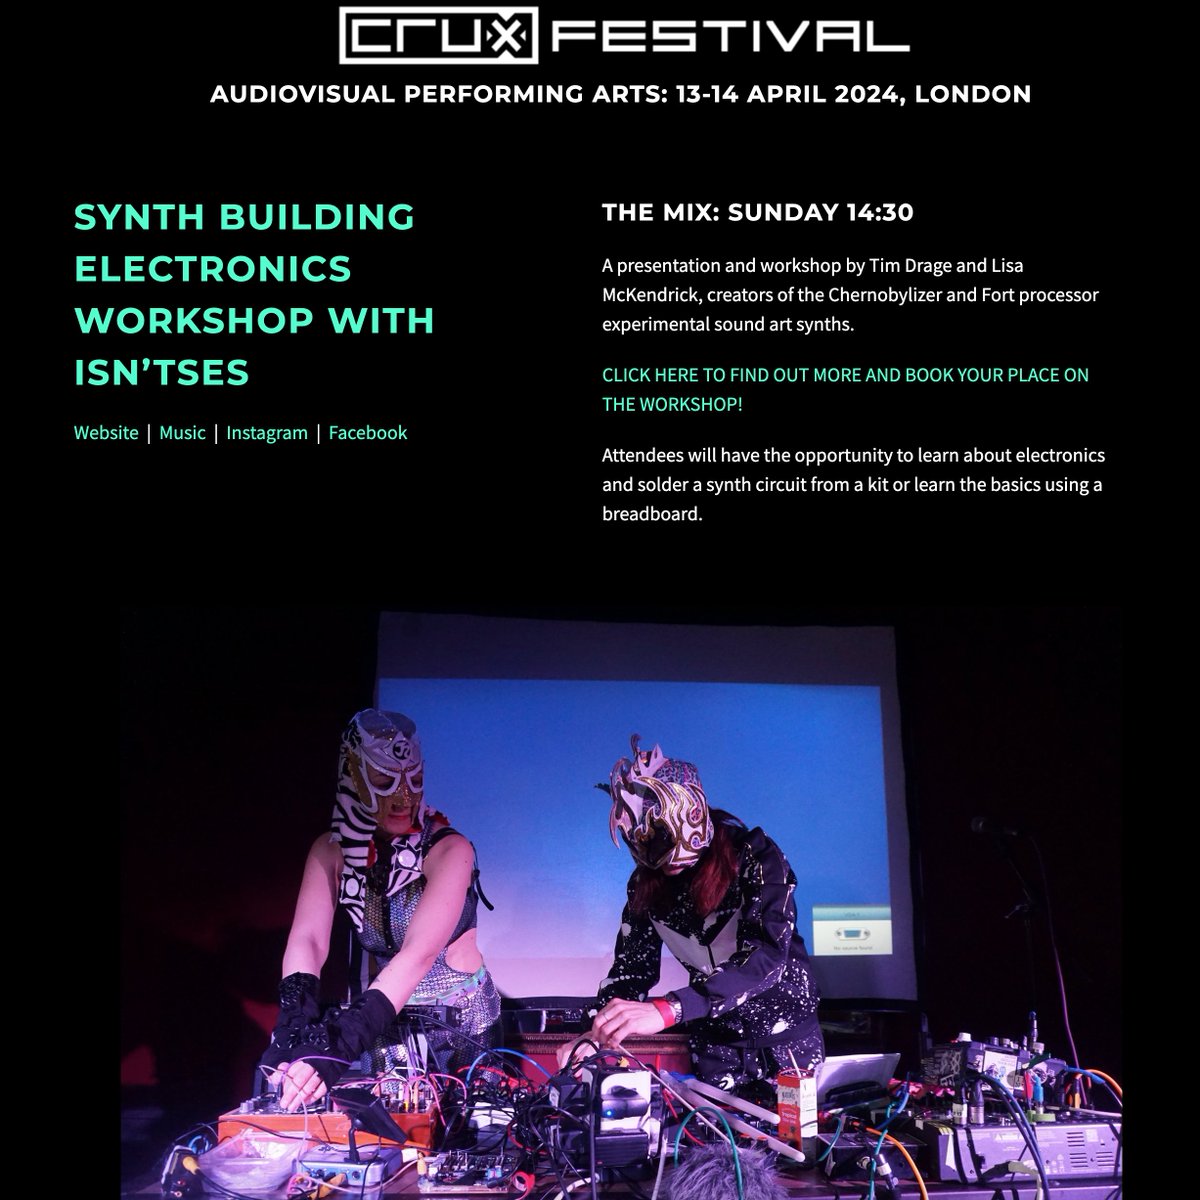 We are holding a presentation & workshop at Crux Festival 14th April. Find out more on our blog and to listen to the synths you can build.
isntses.weebly.com/blog/workshop-…

#electronicsworkshop #noisesynth #noise #workshop #diysynth #crux #festival #musicfestival